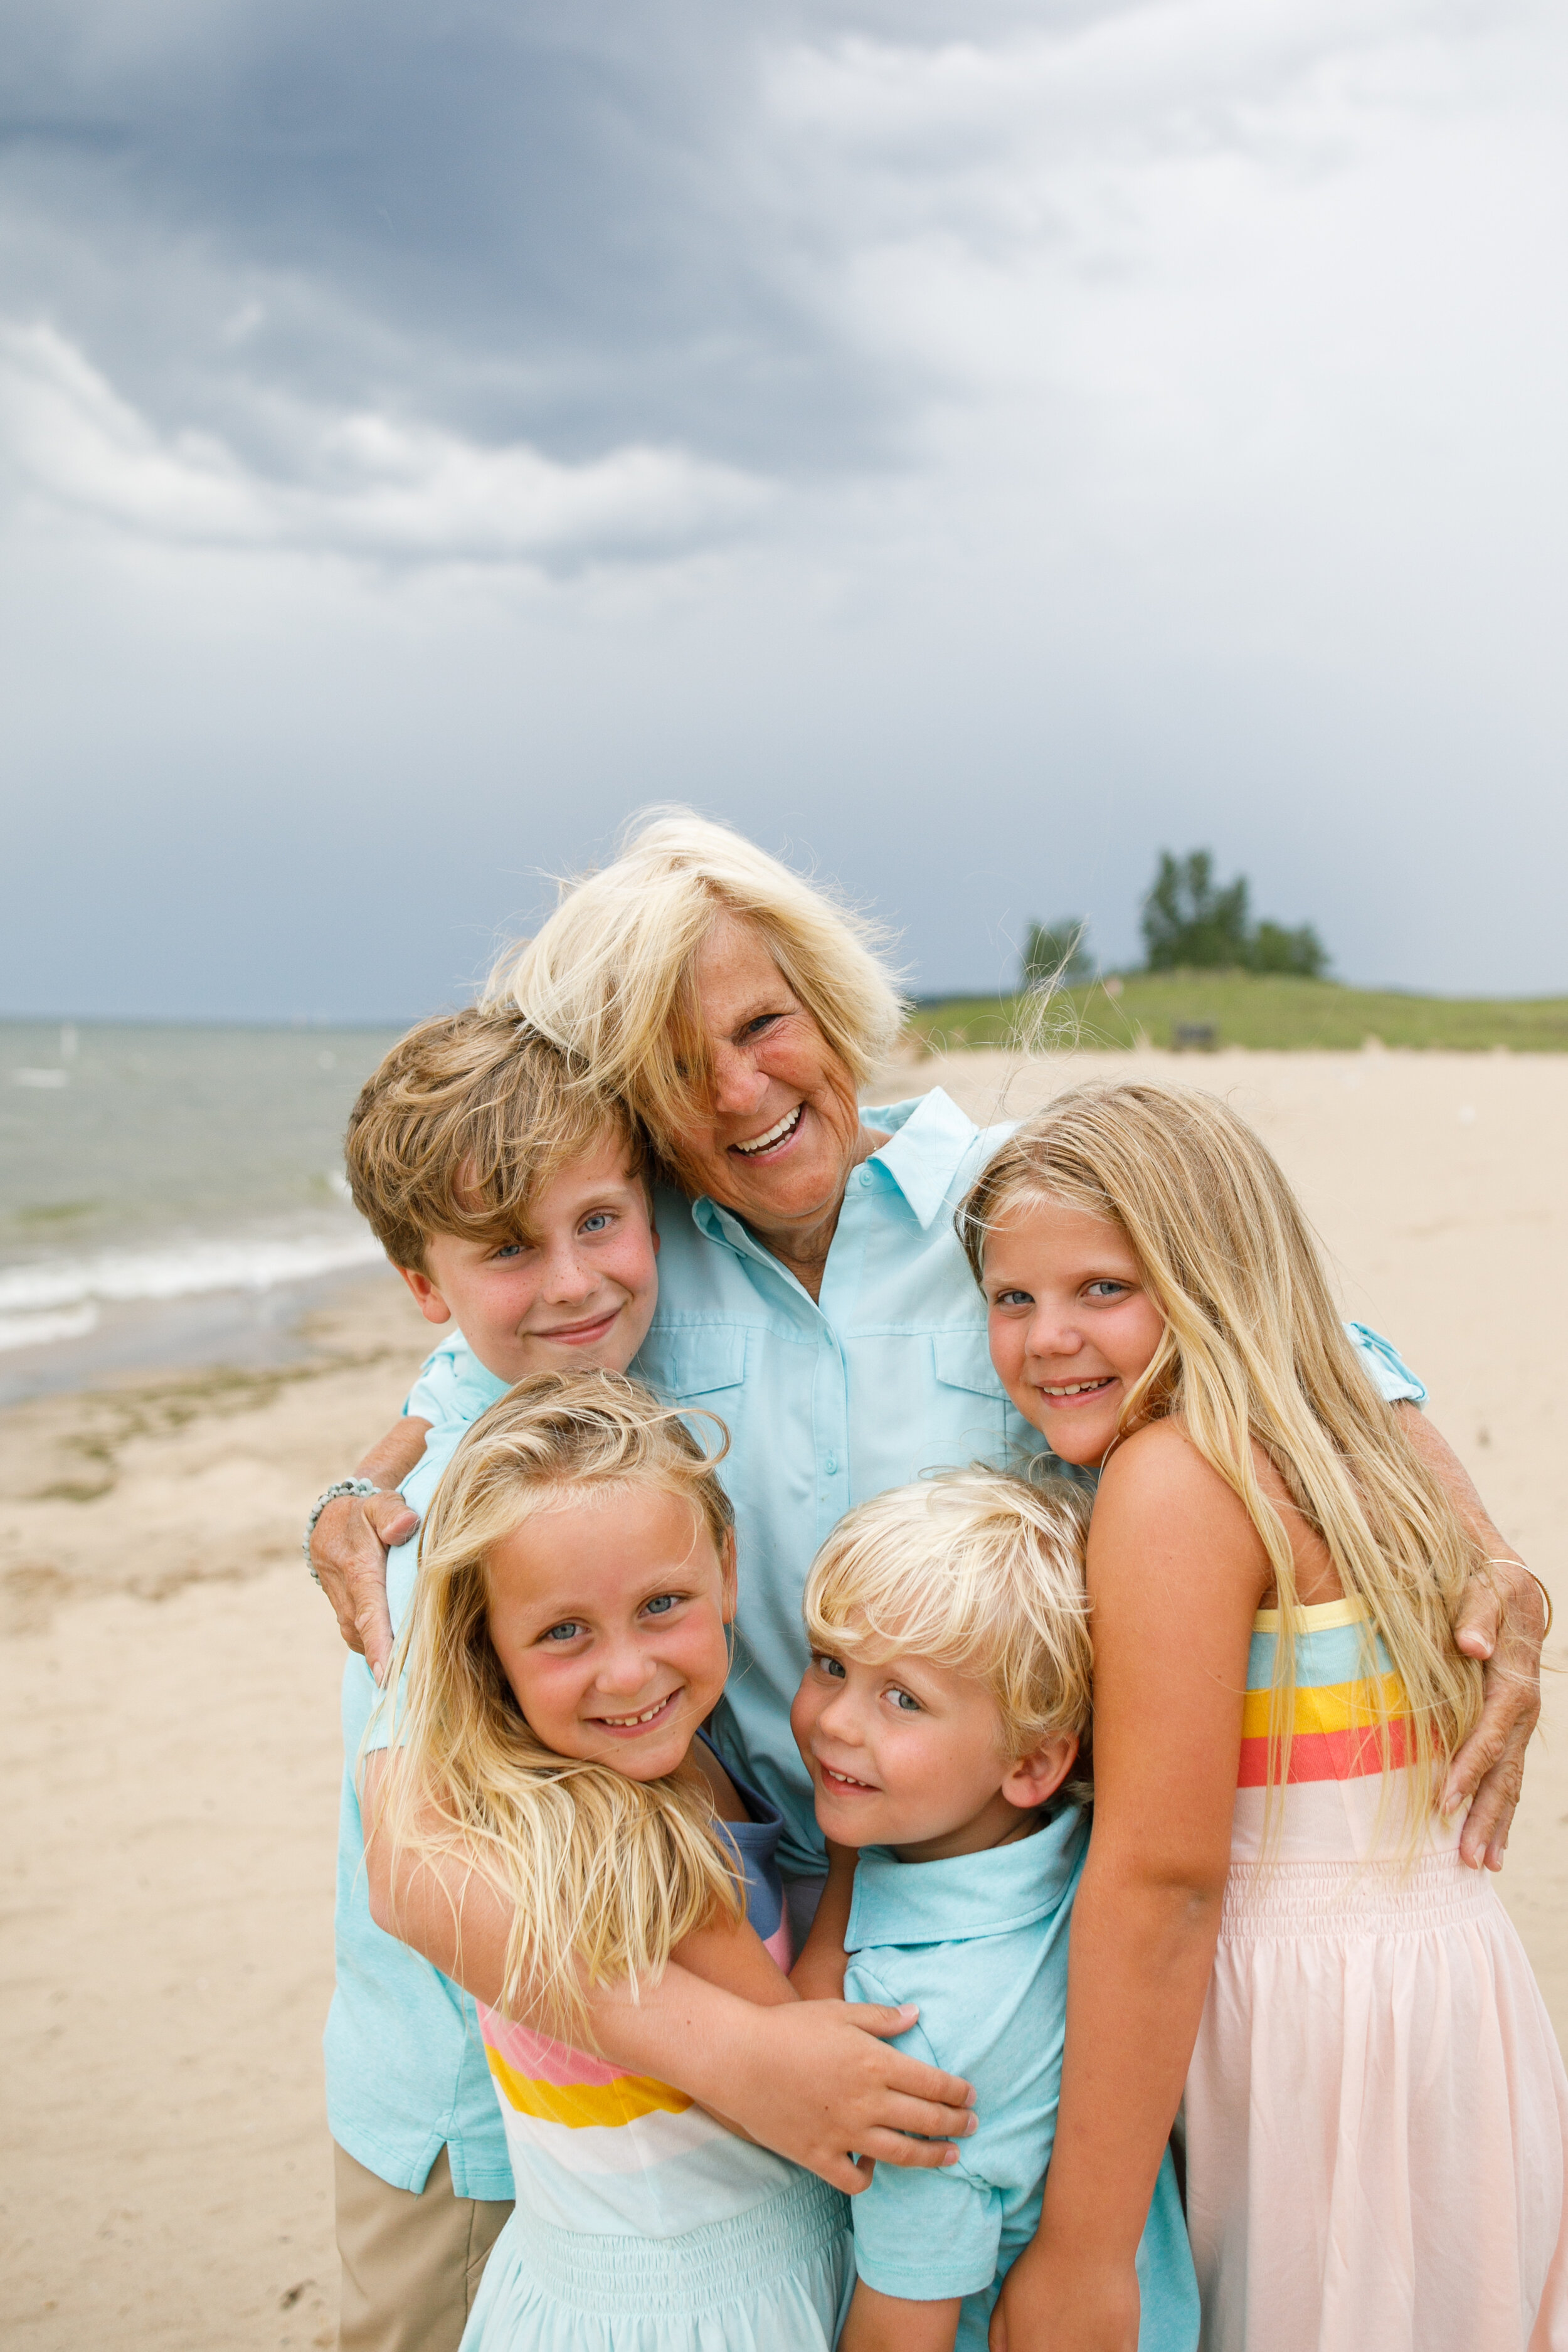 Murphy Family - Saugatuck Family Session - Oval Beach Family Session - Grand Rapids Photographer - Saugatuck Photographer - J Darling Photo 005.jpg